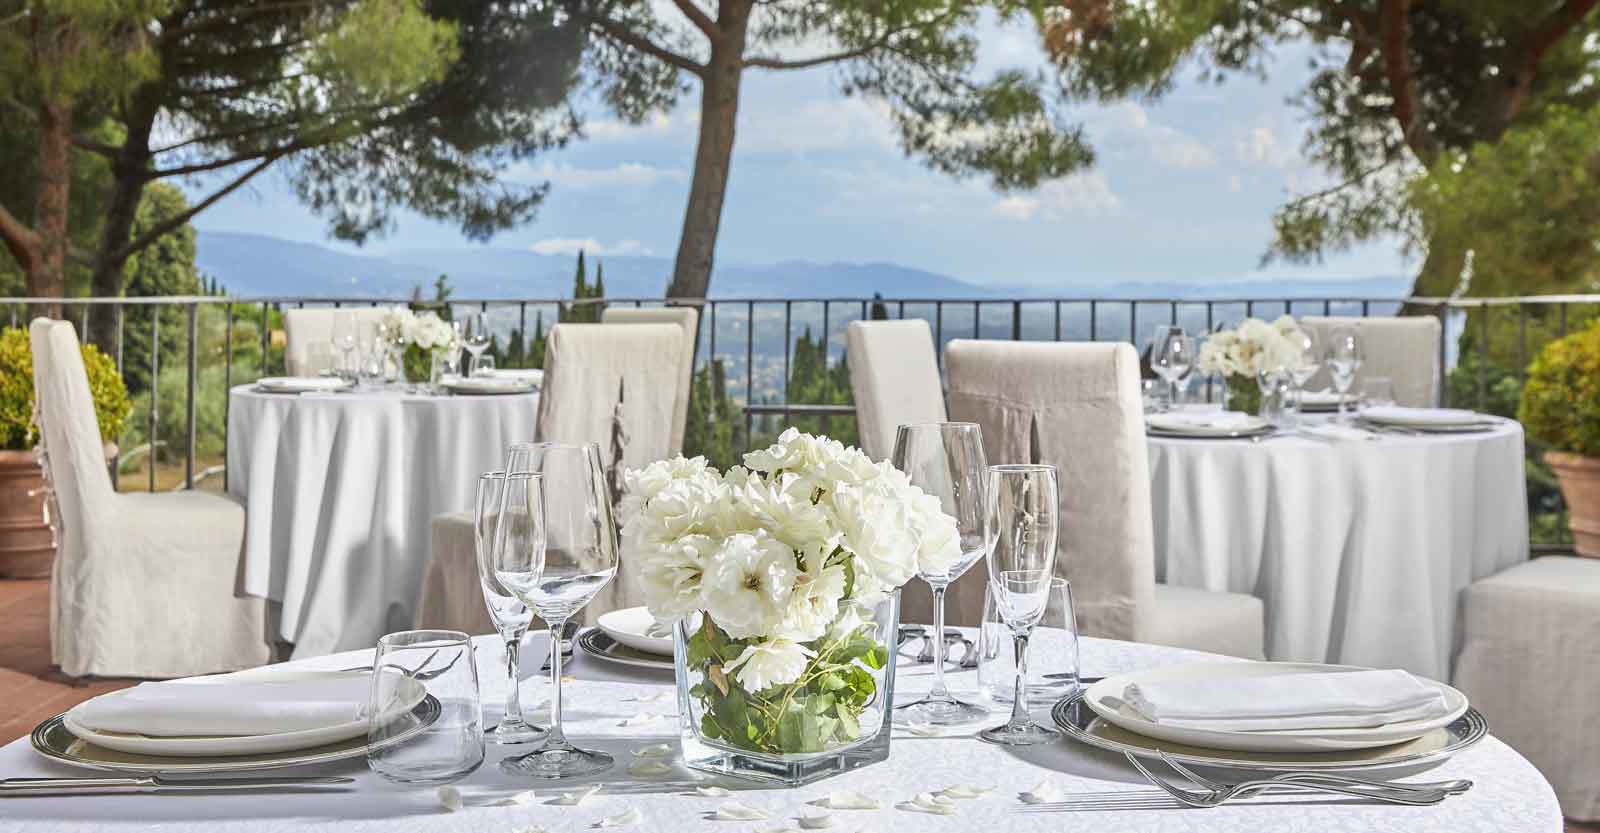 Hotel Villa Fiesole - Weddings and Events 6